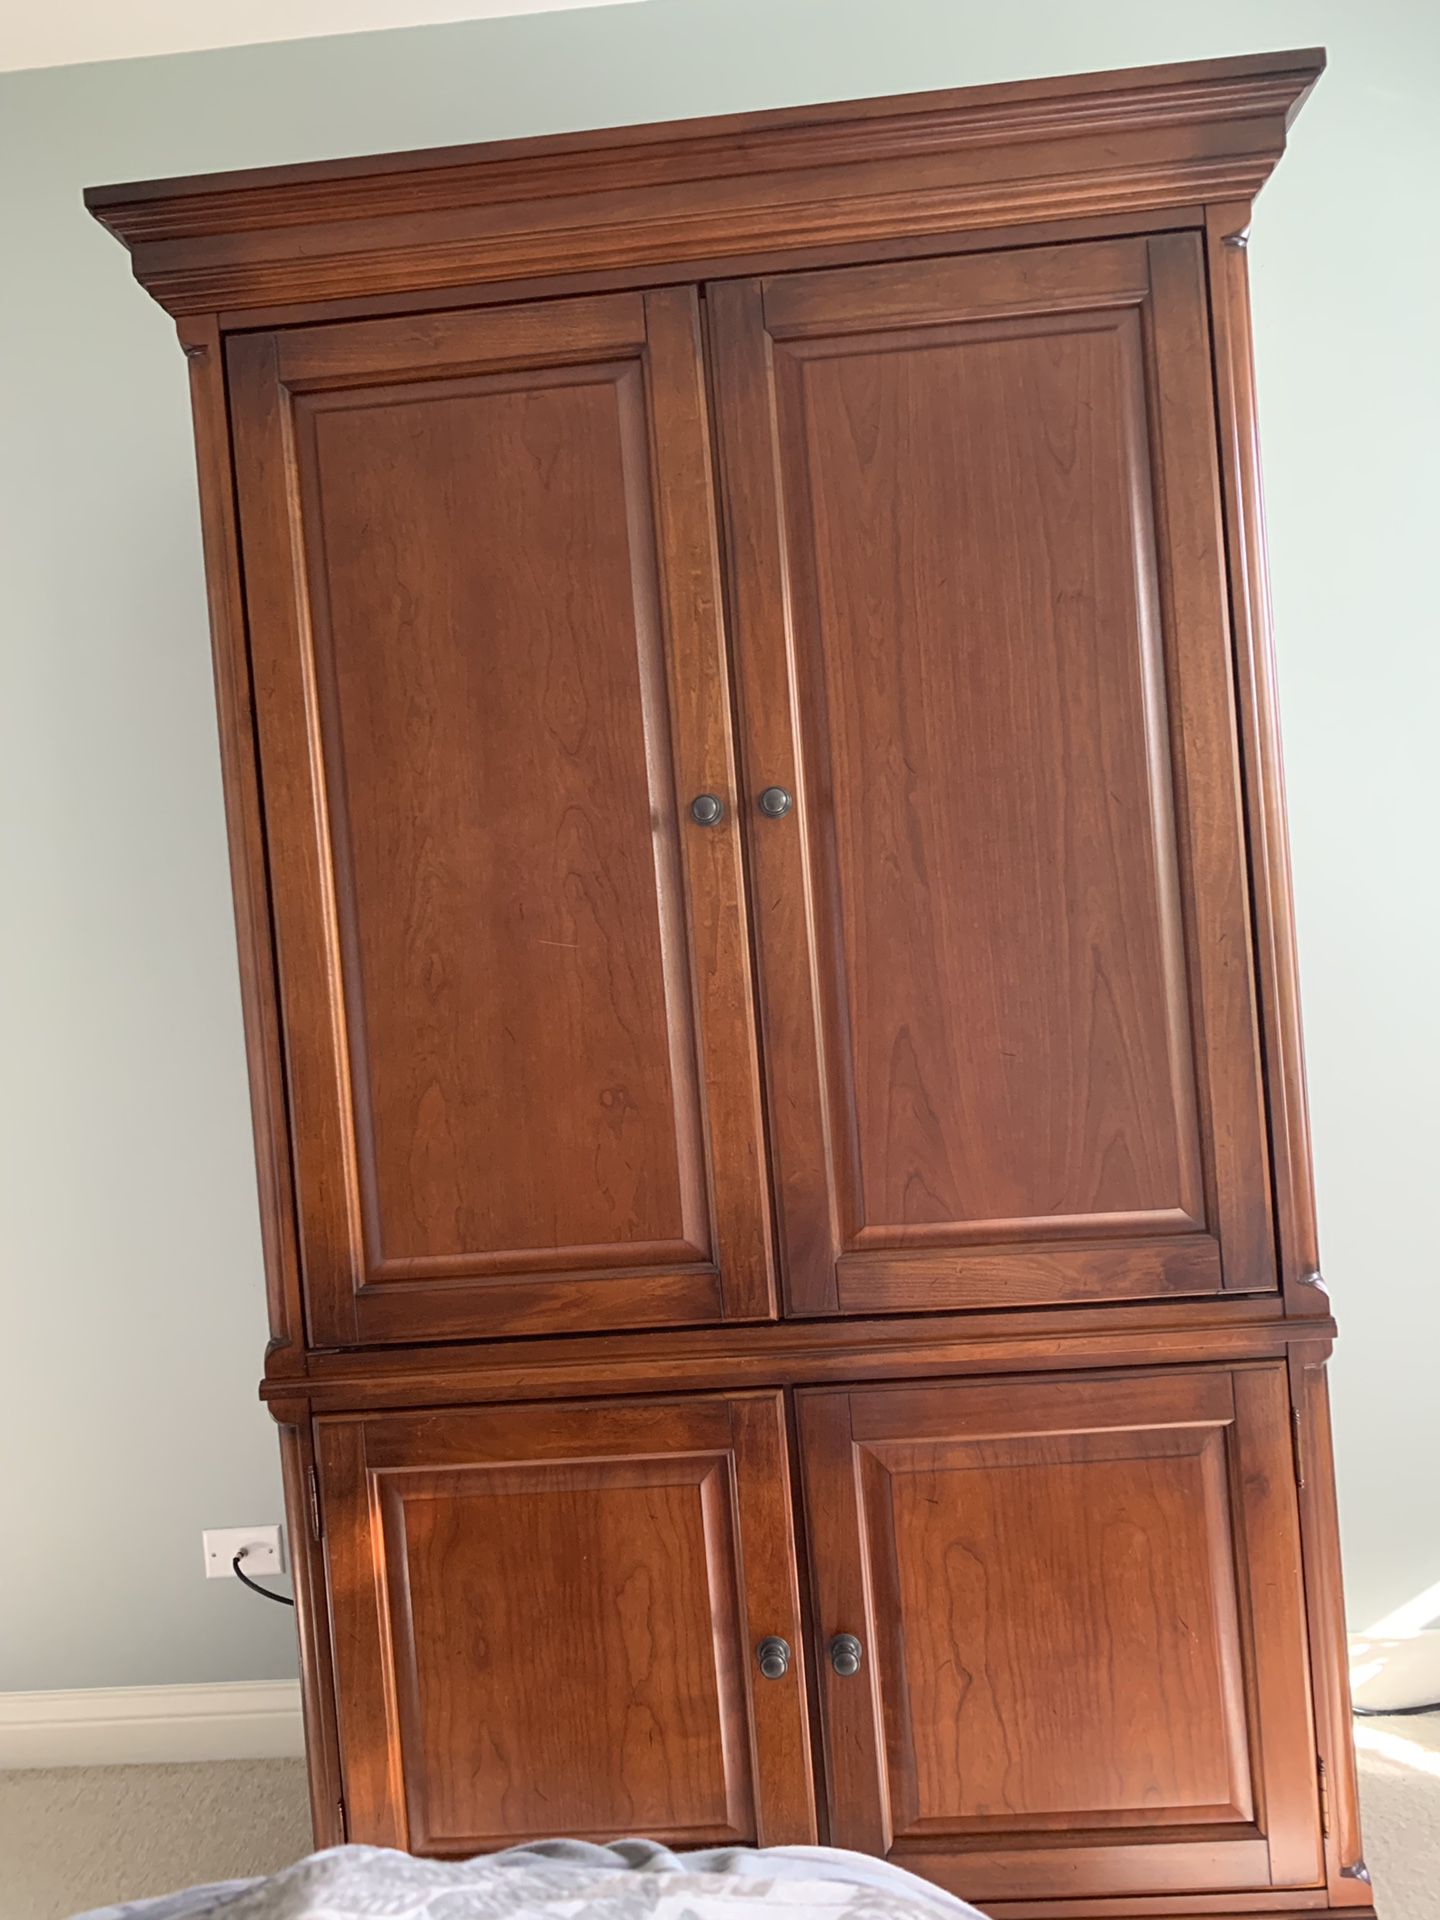 Clothes Armoire or storage furniture